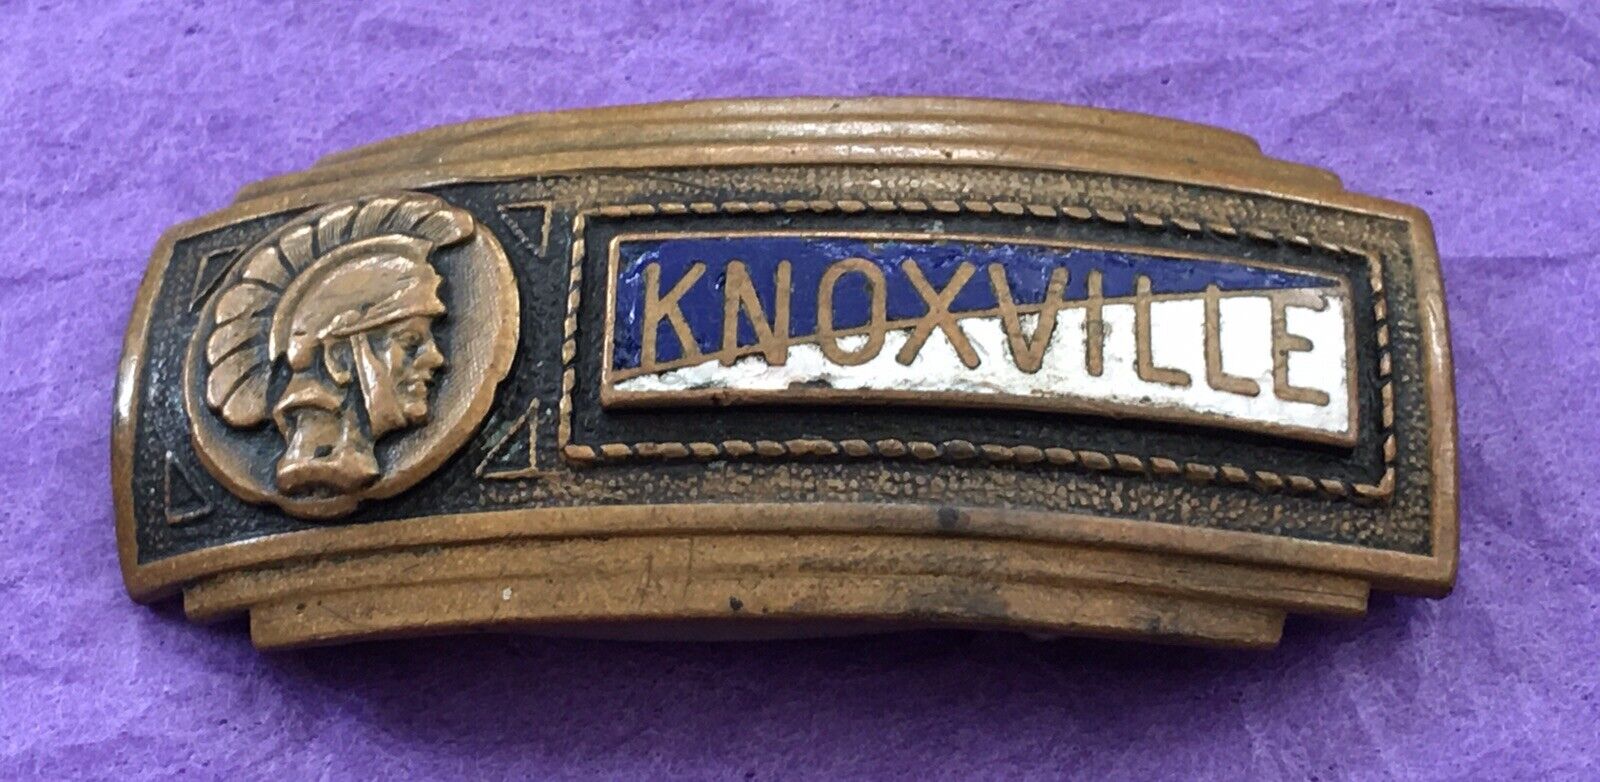 Sale   Awesome 1940’S Jenkins Knoxville Tennessee Antique Belt Buckle